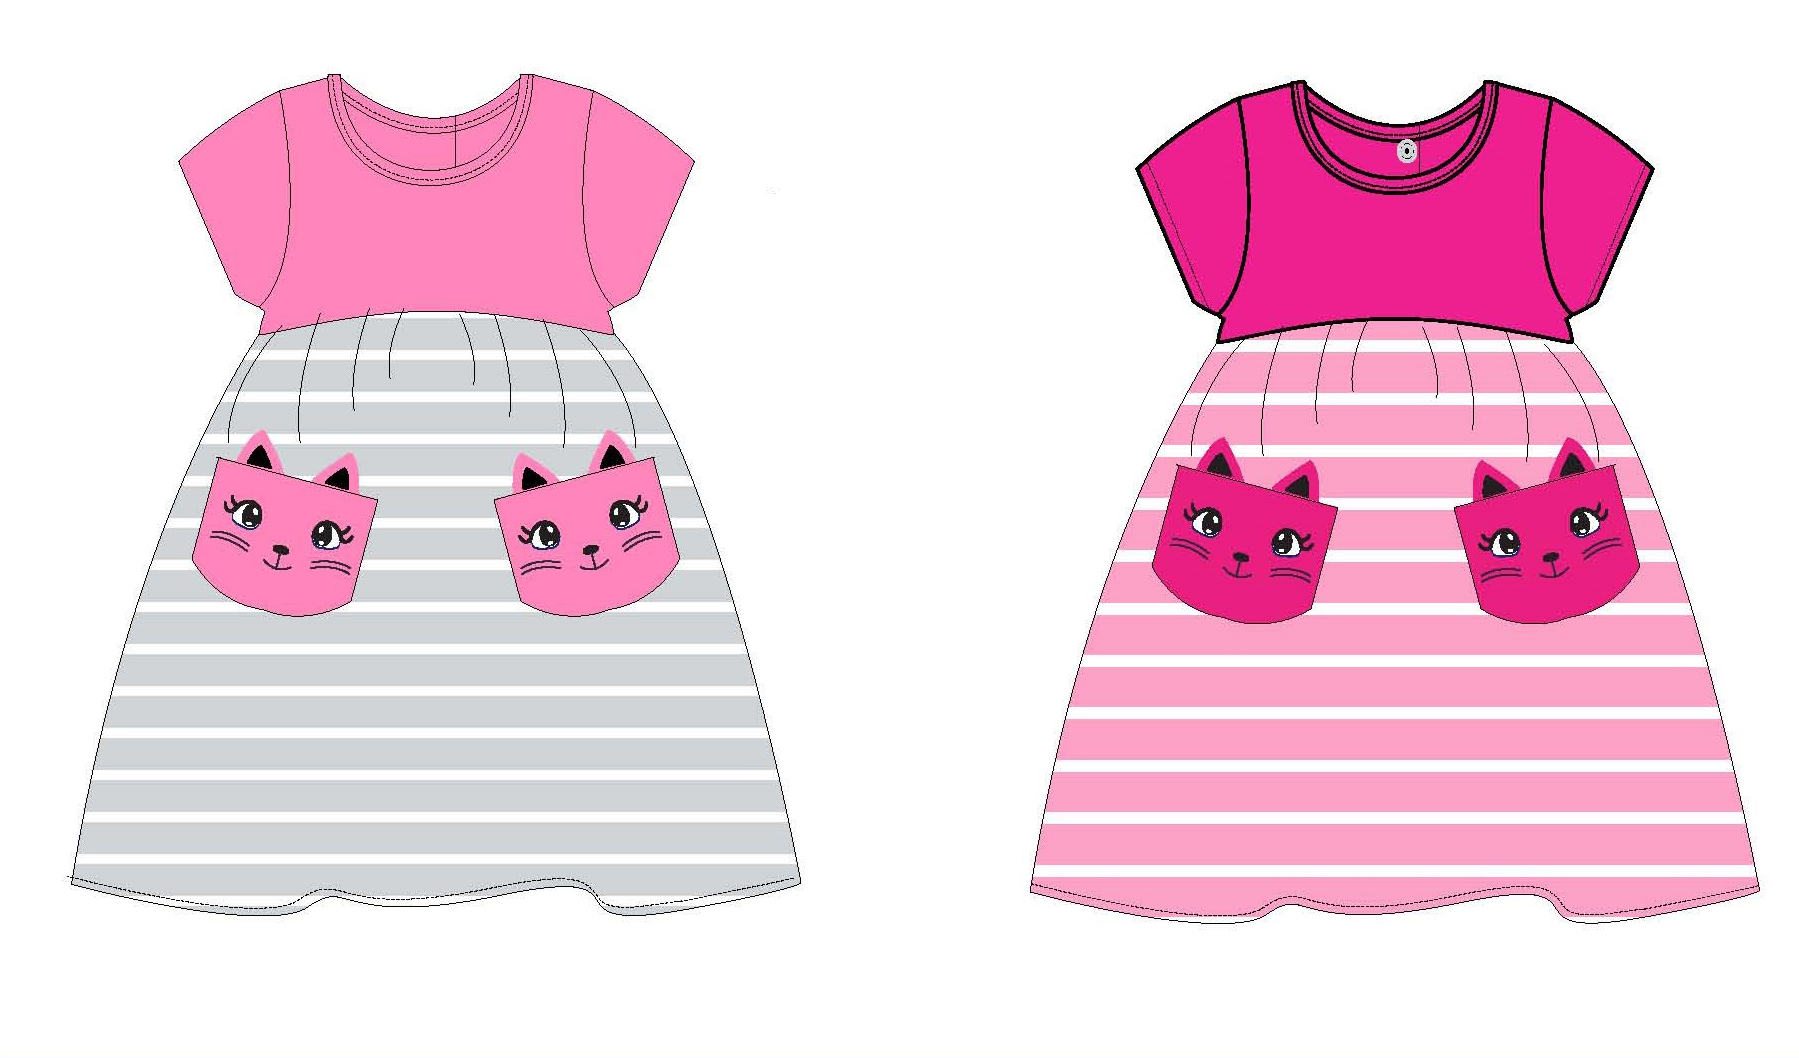 Toddler Girl's Knit Striped Dresses w/ Embroidered Cat Printed Pockets - Sizes 2T-4T